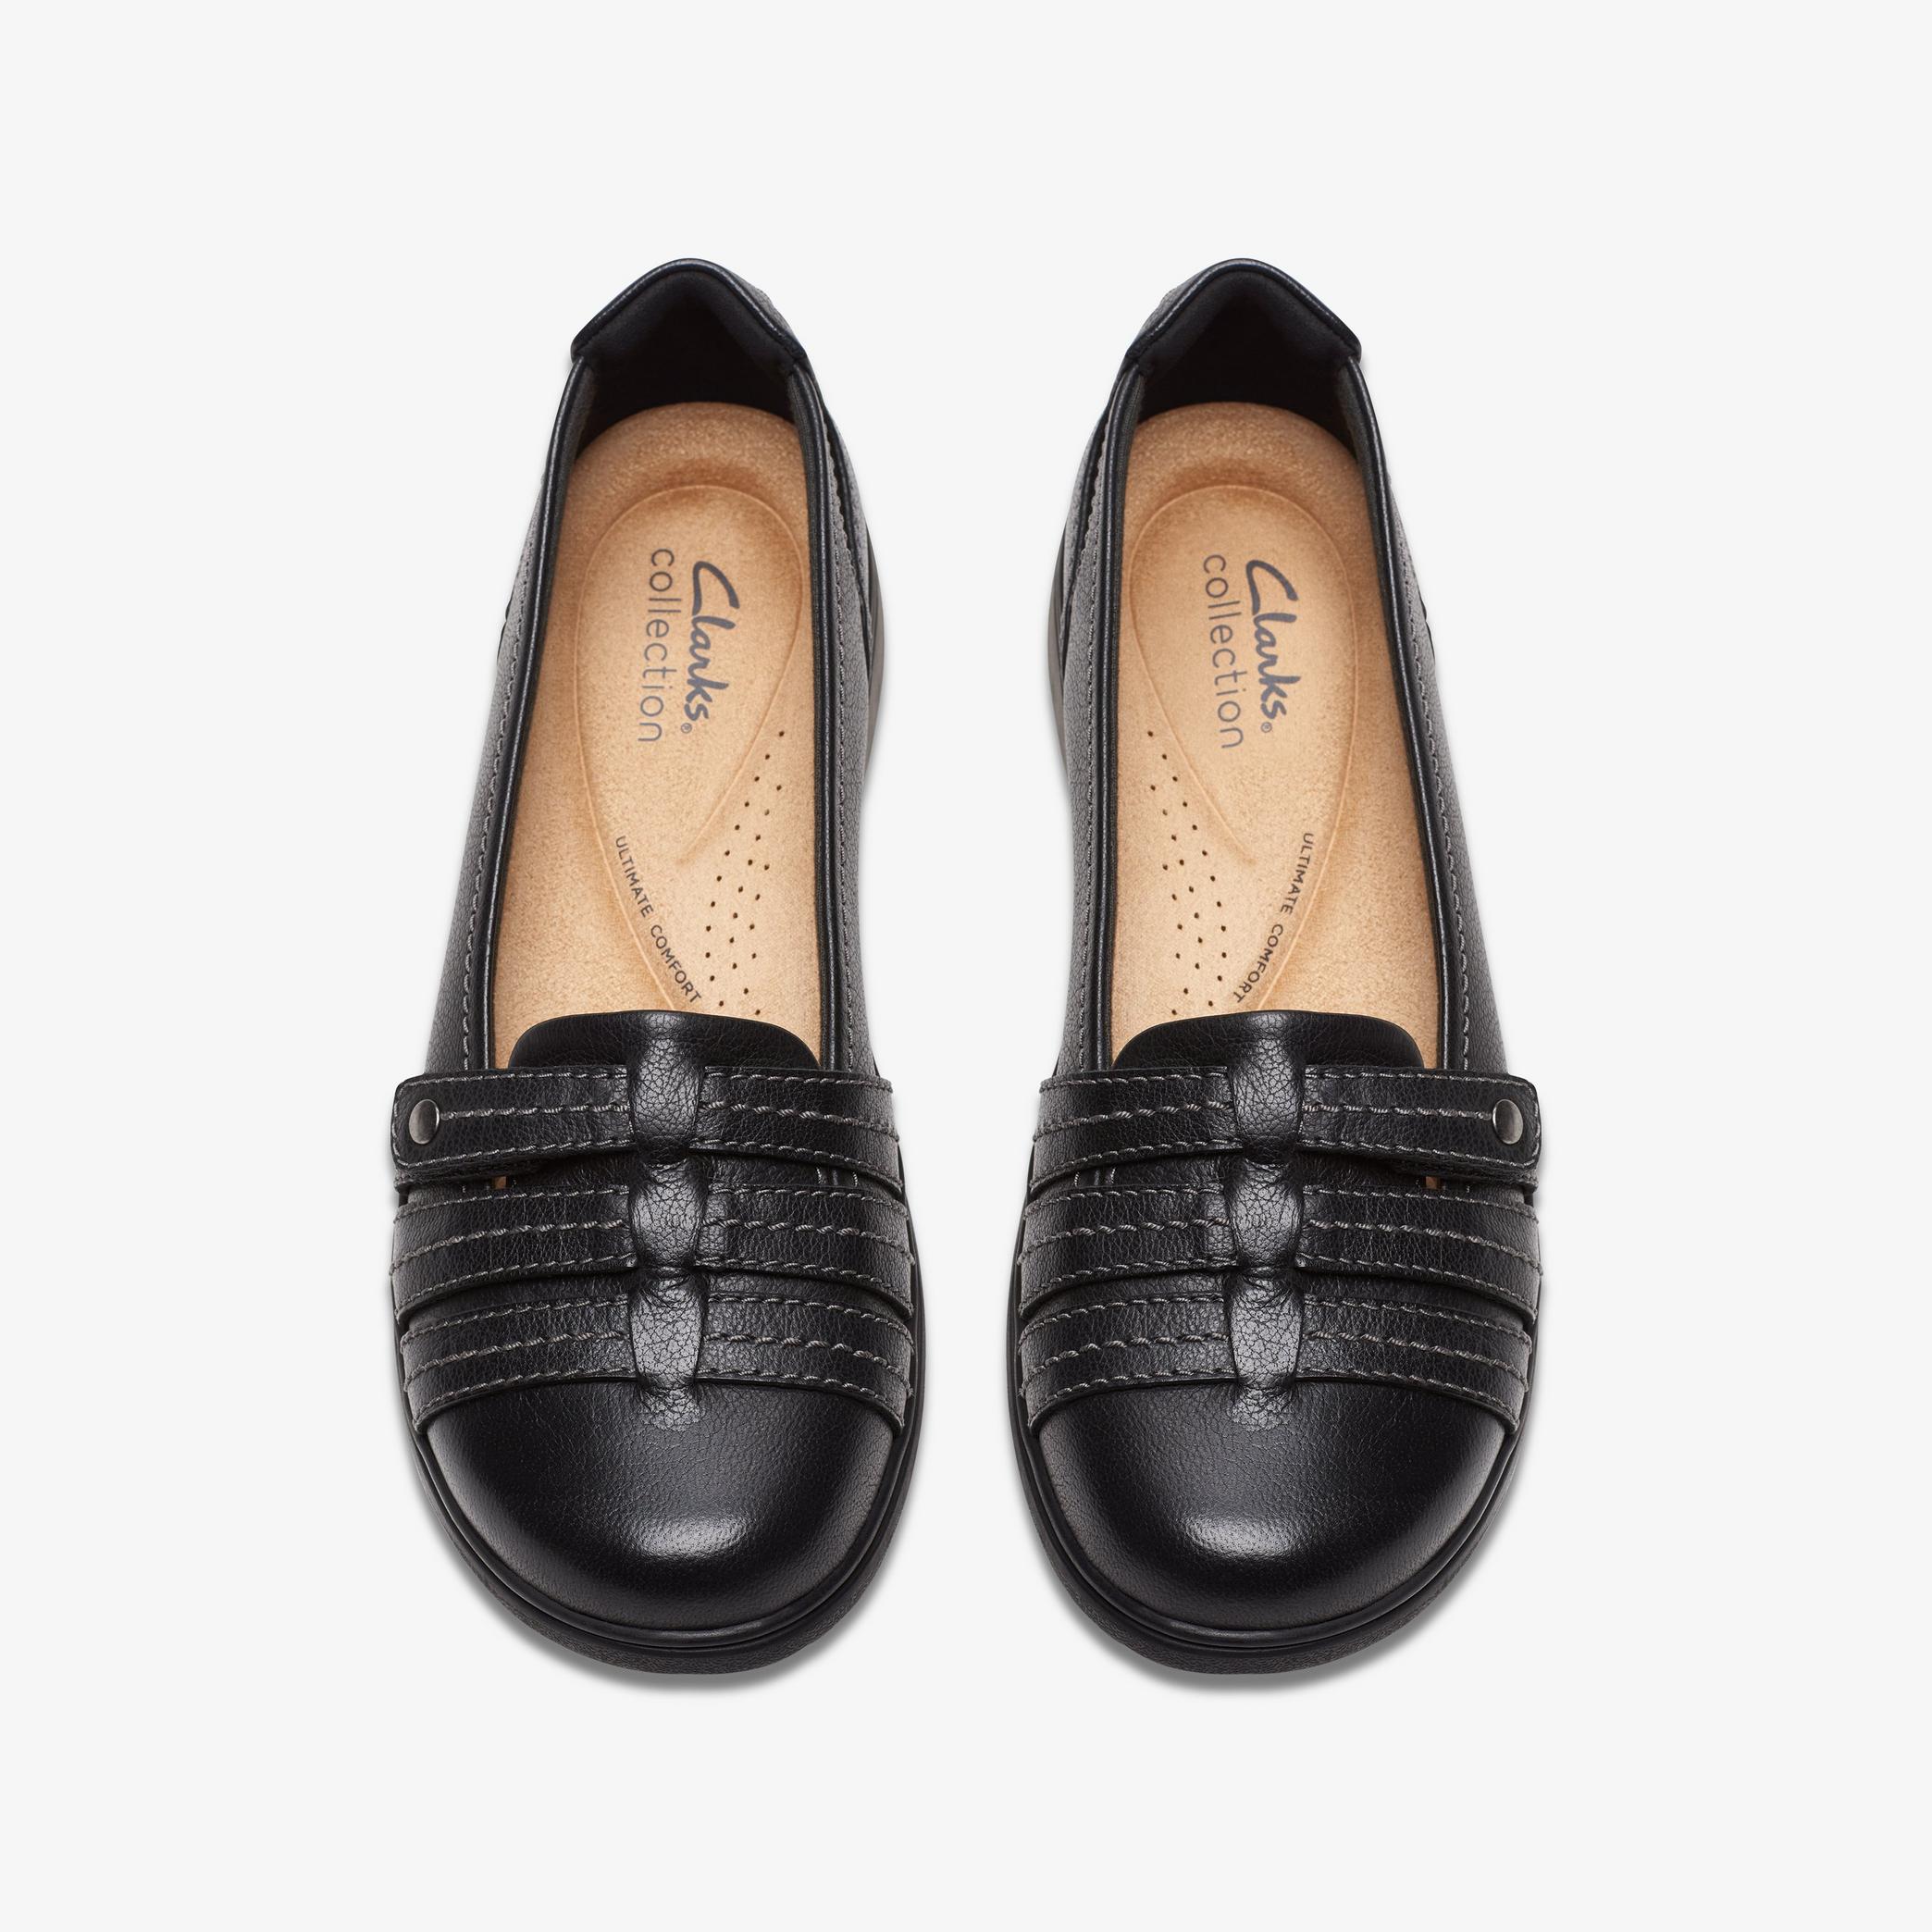 Carleigh Eliza Black Leather Slip Ons, view 6 of 6